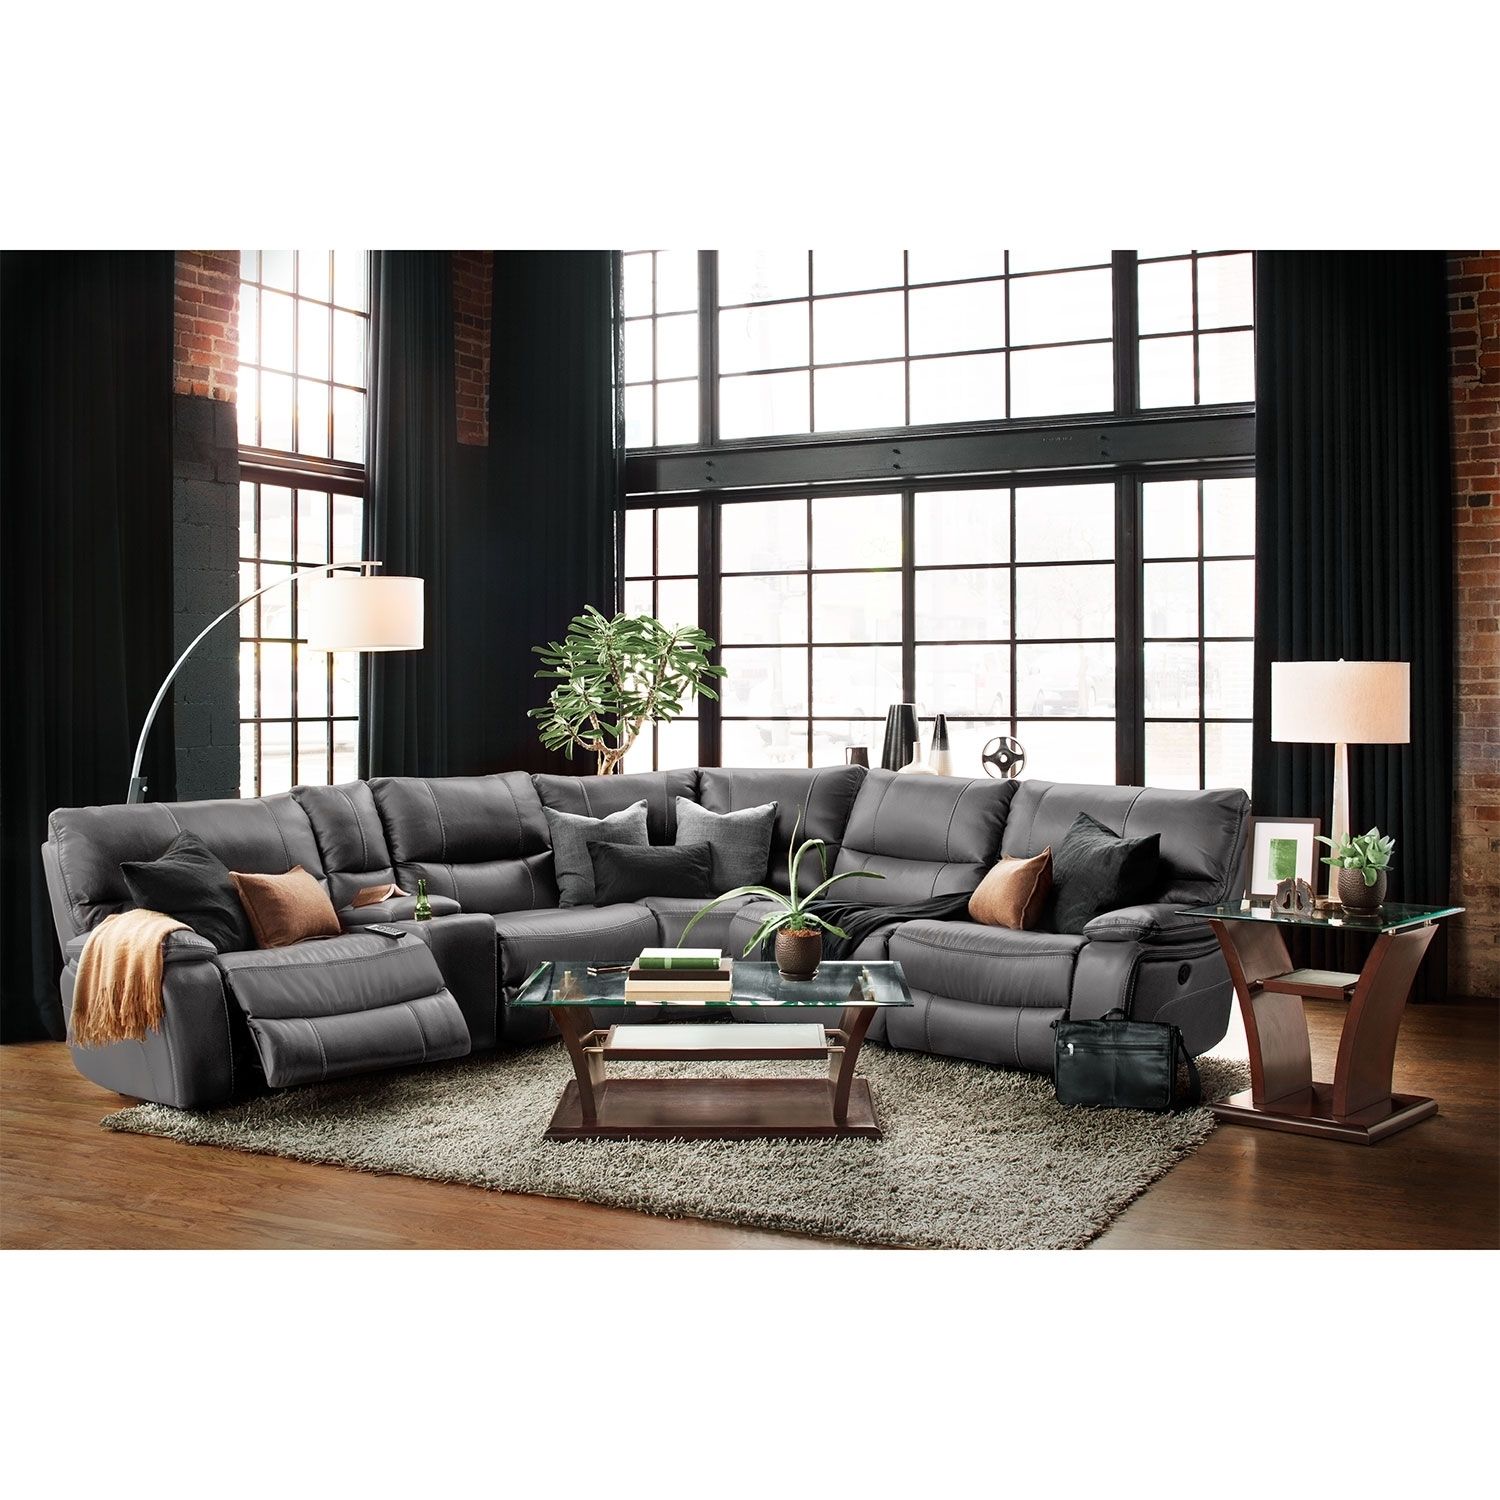 3 Pc Mccaskill Collection Gray Leather Match Upholstered Sectional In Economax Sectional Sofas (Photo 10 of 10)